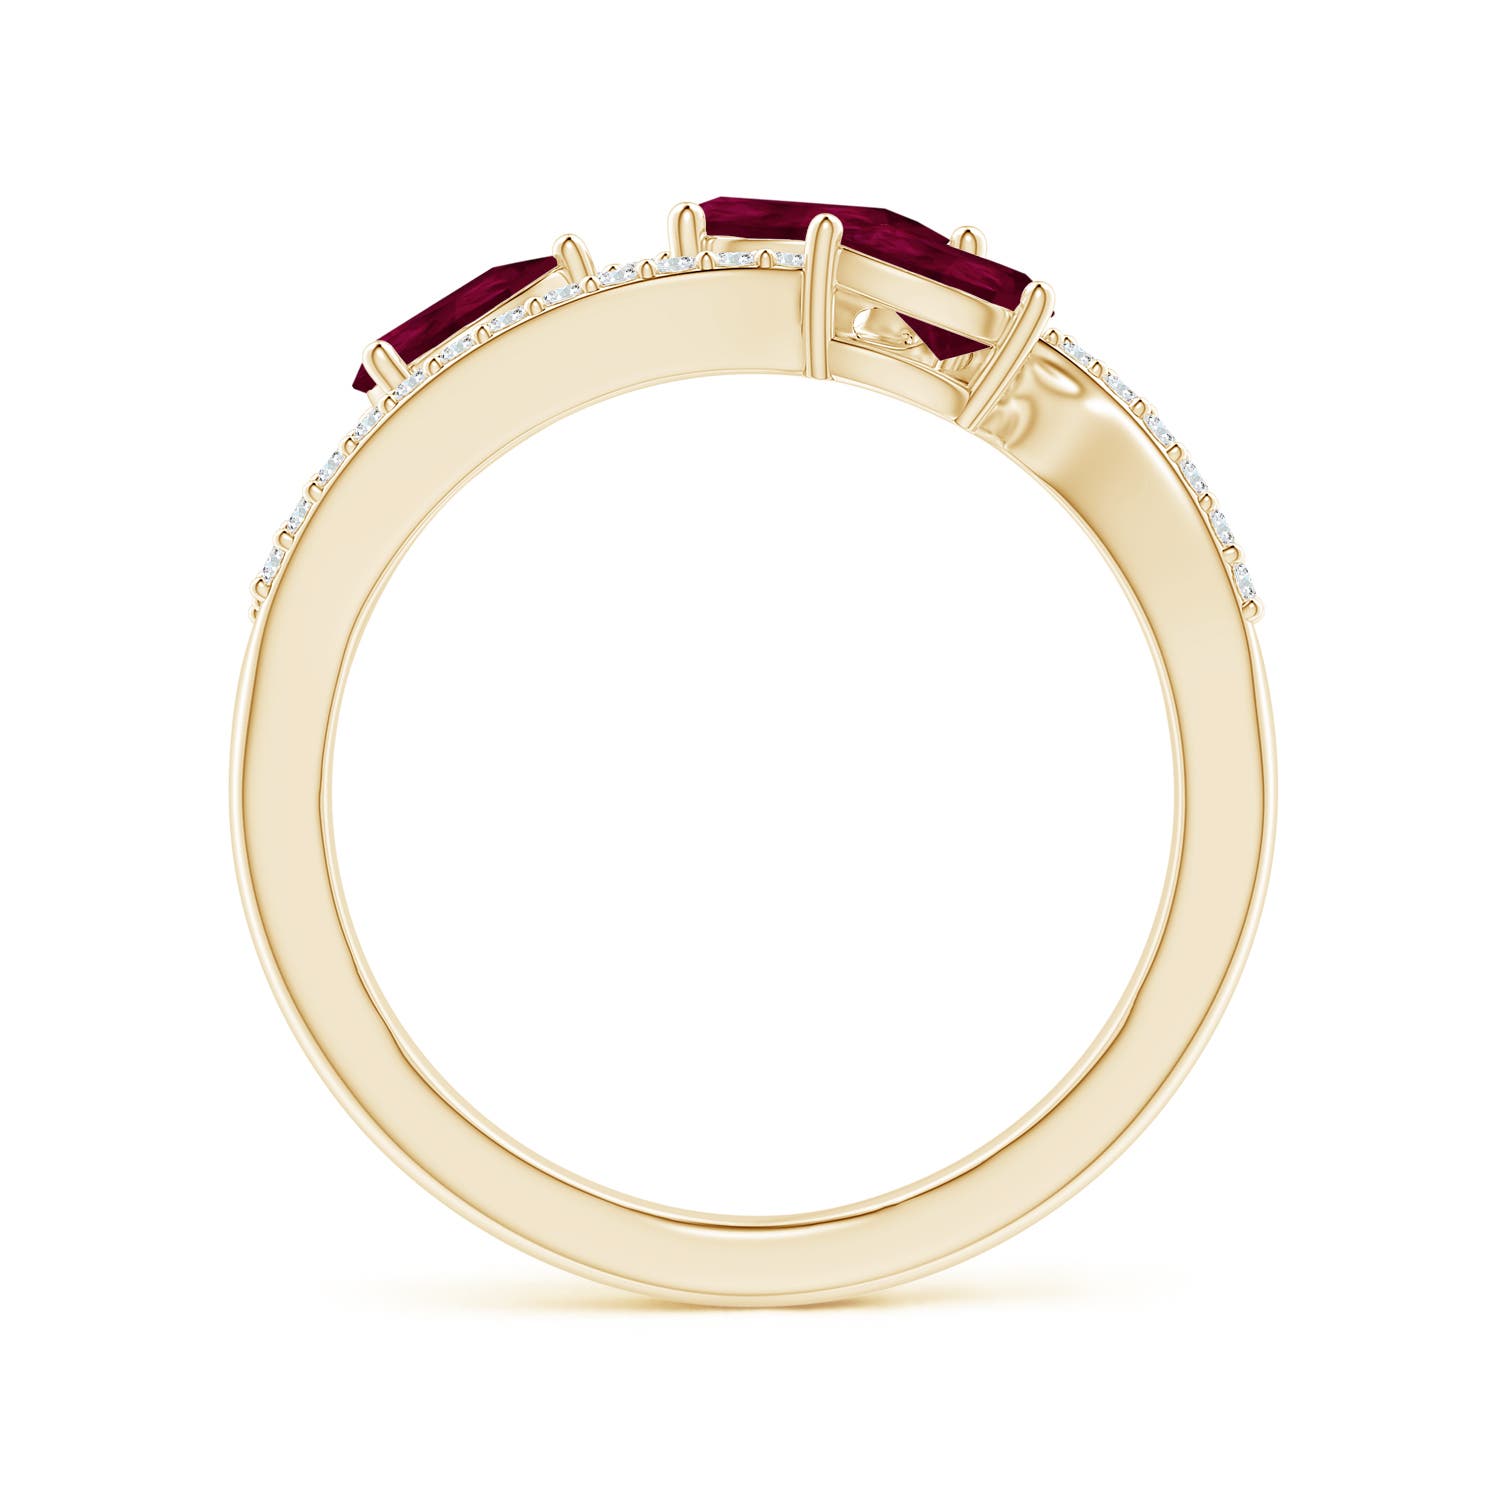 A - Ruby / 1.03 CT / 14 KT Yellow Gold